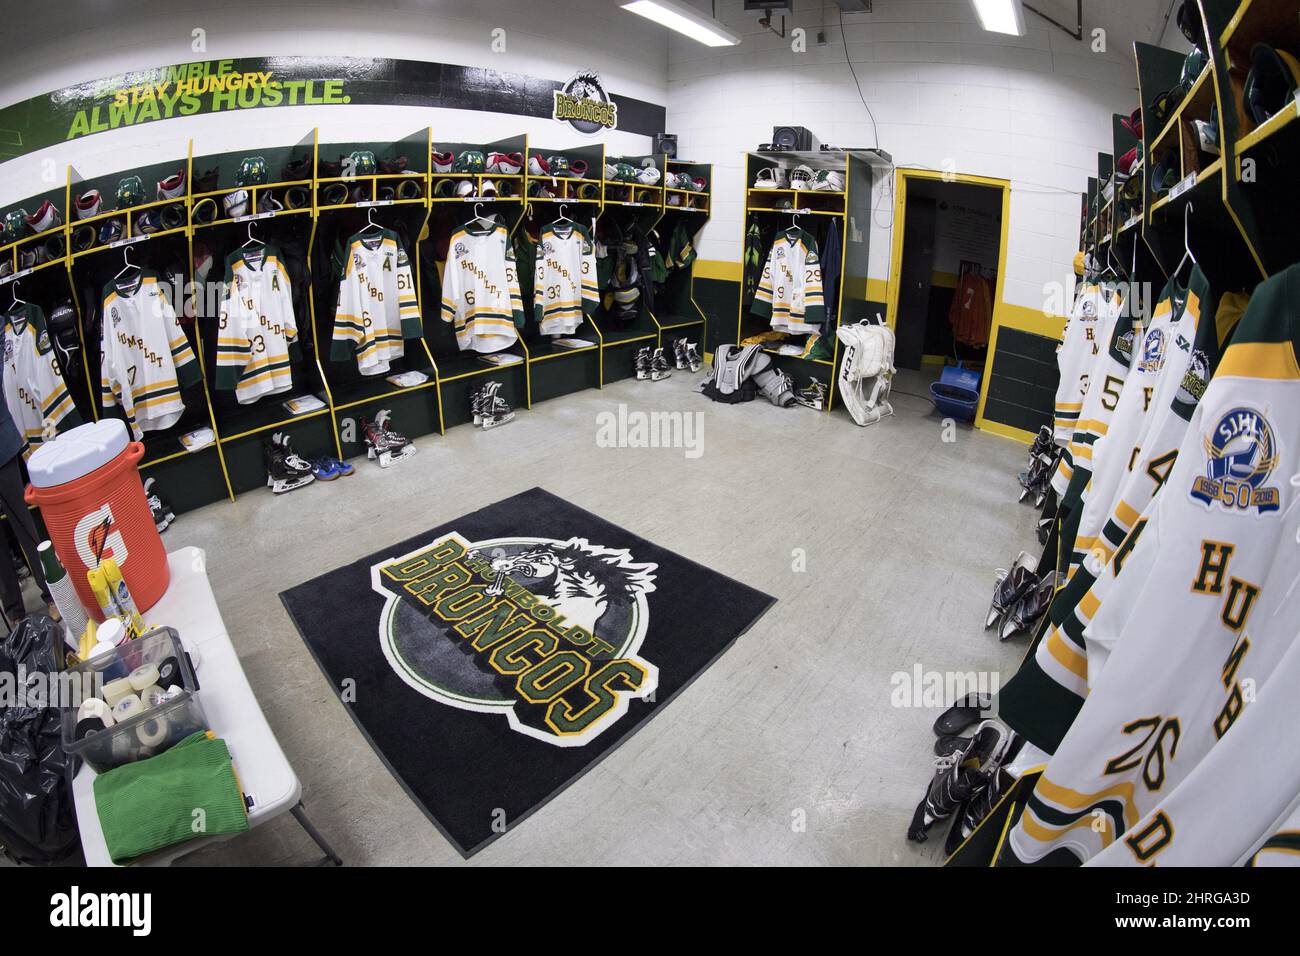 Humboldt Broncos Gifts & Merchandise for Sale